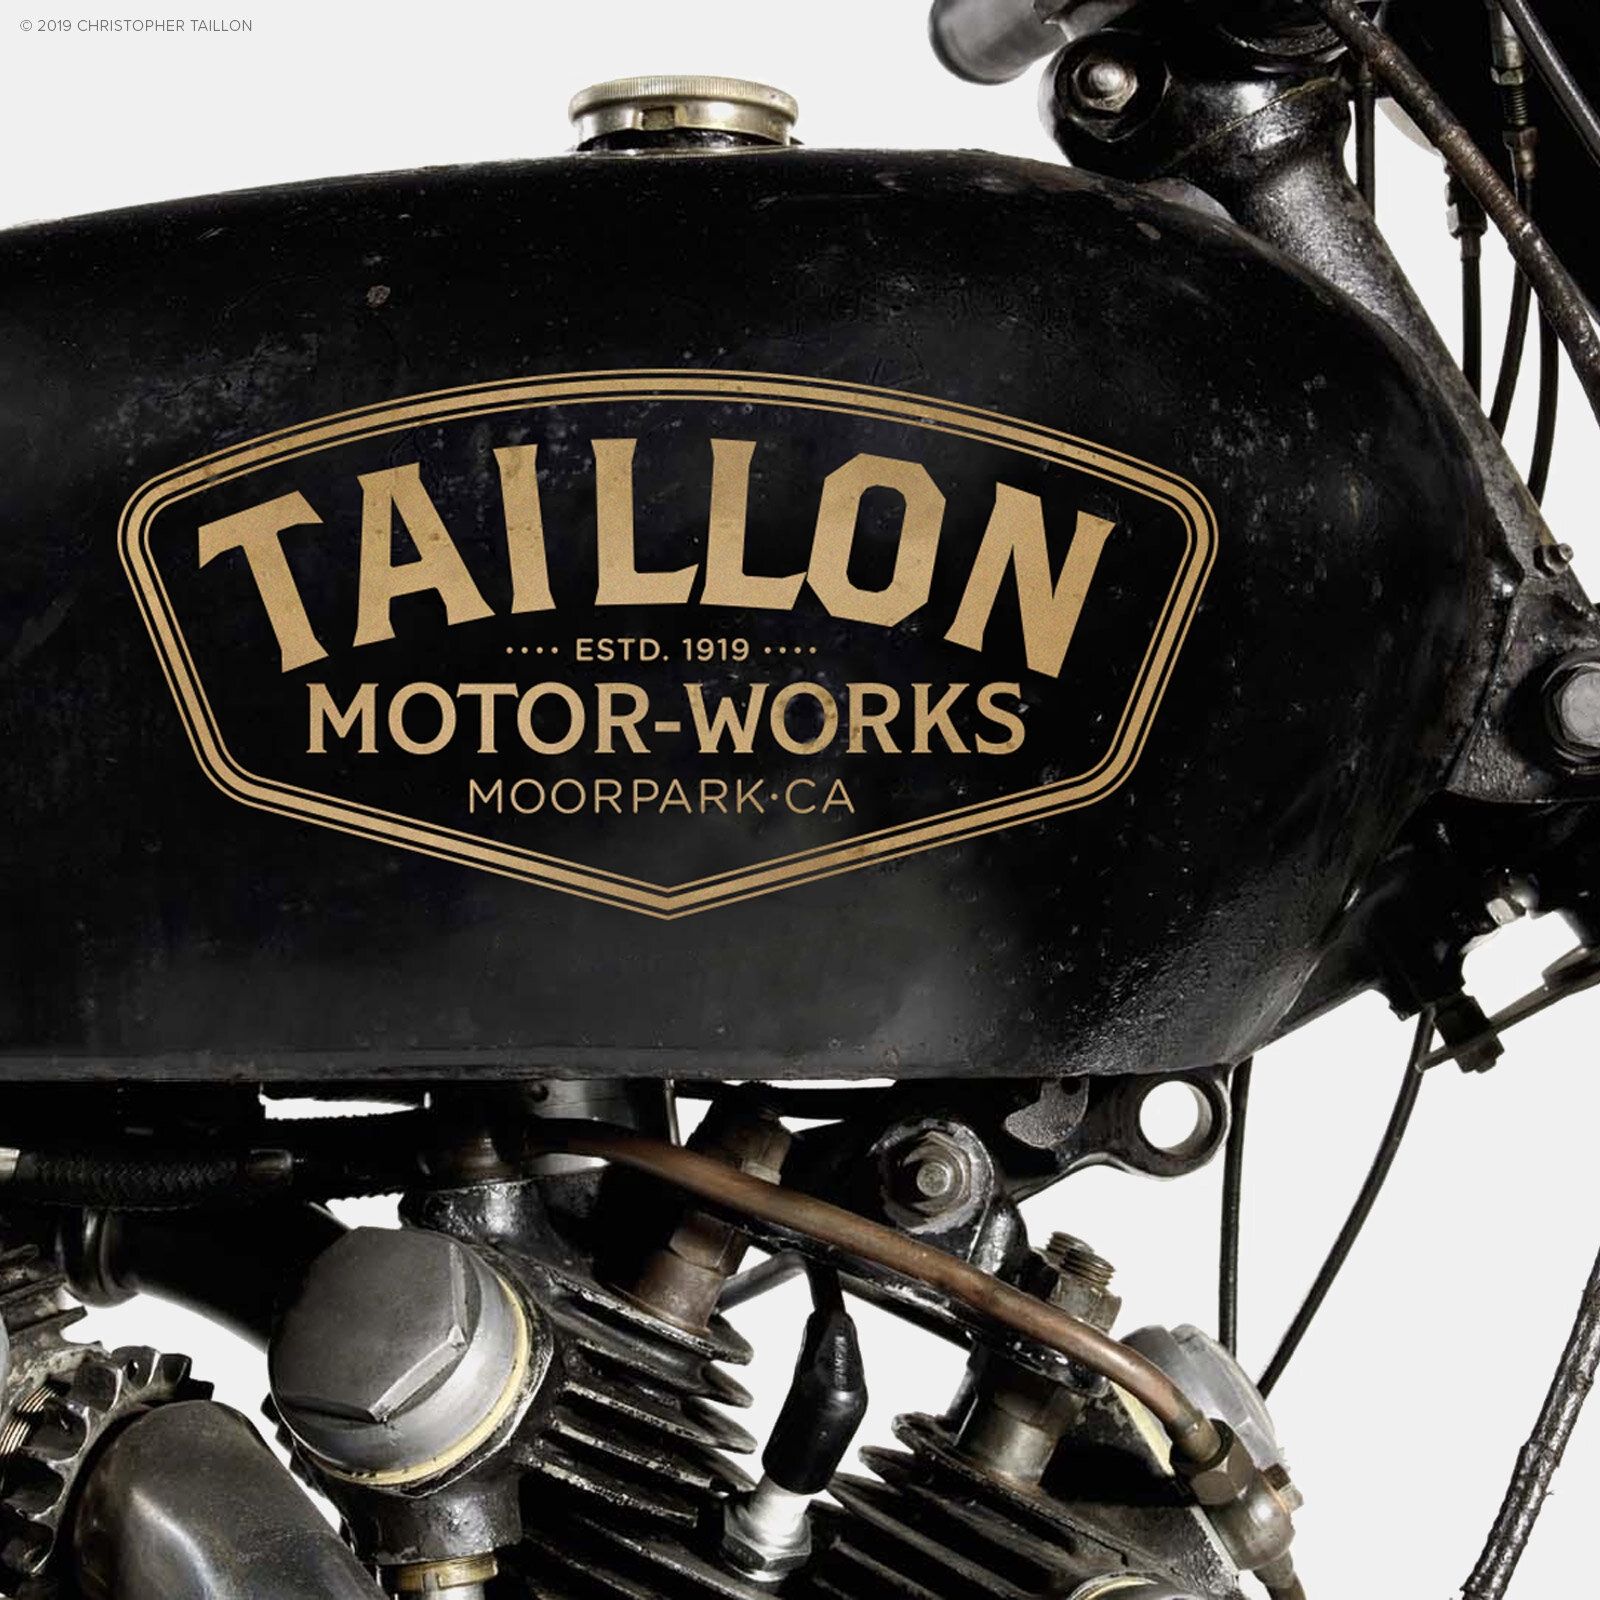 Taillon Motor-Works